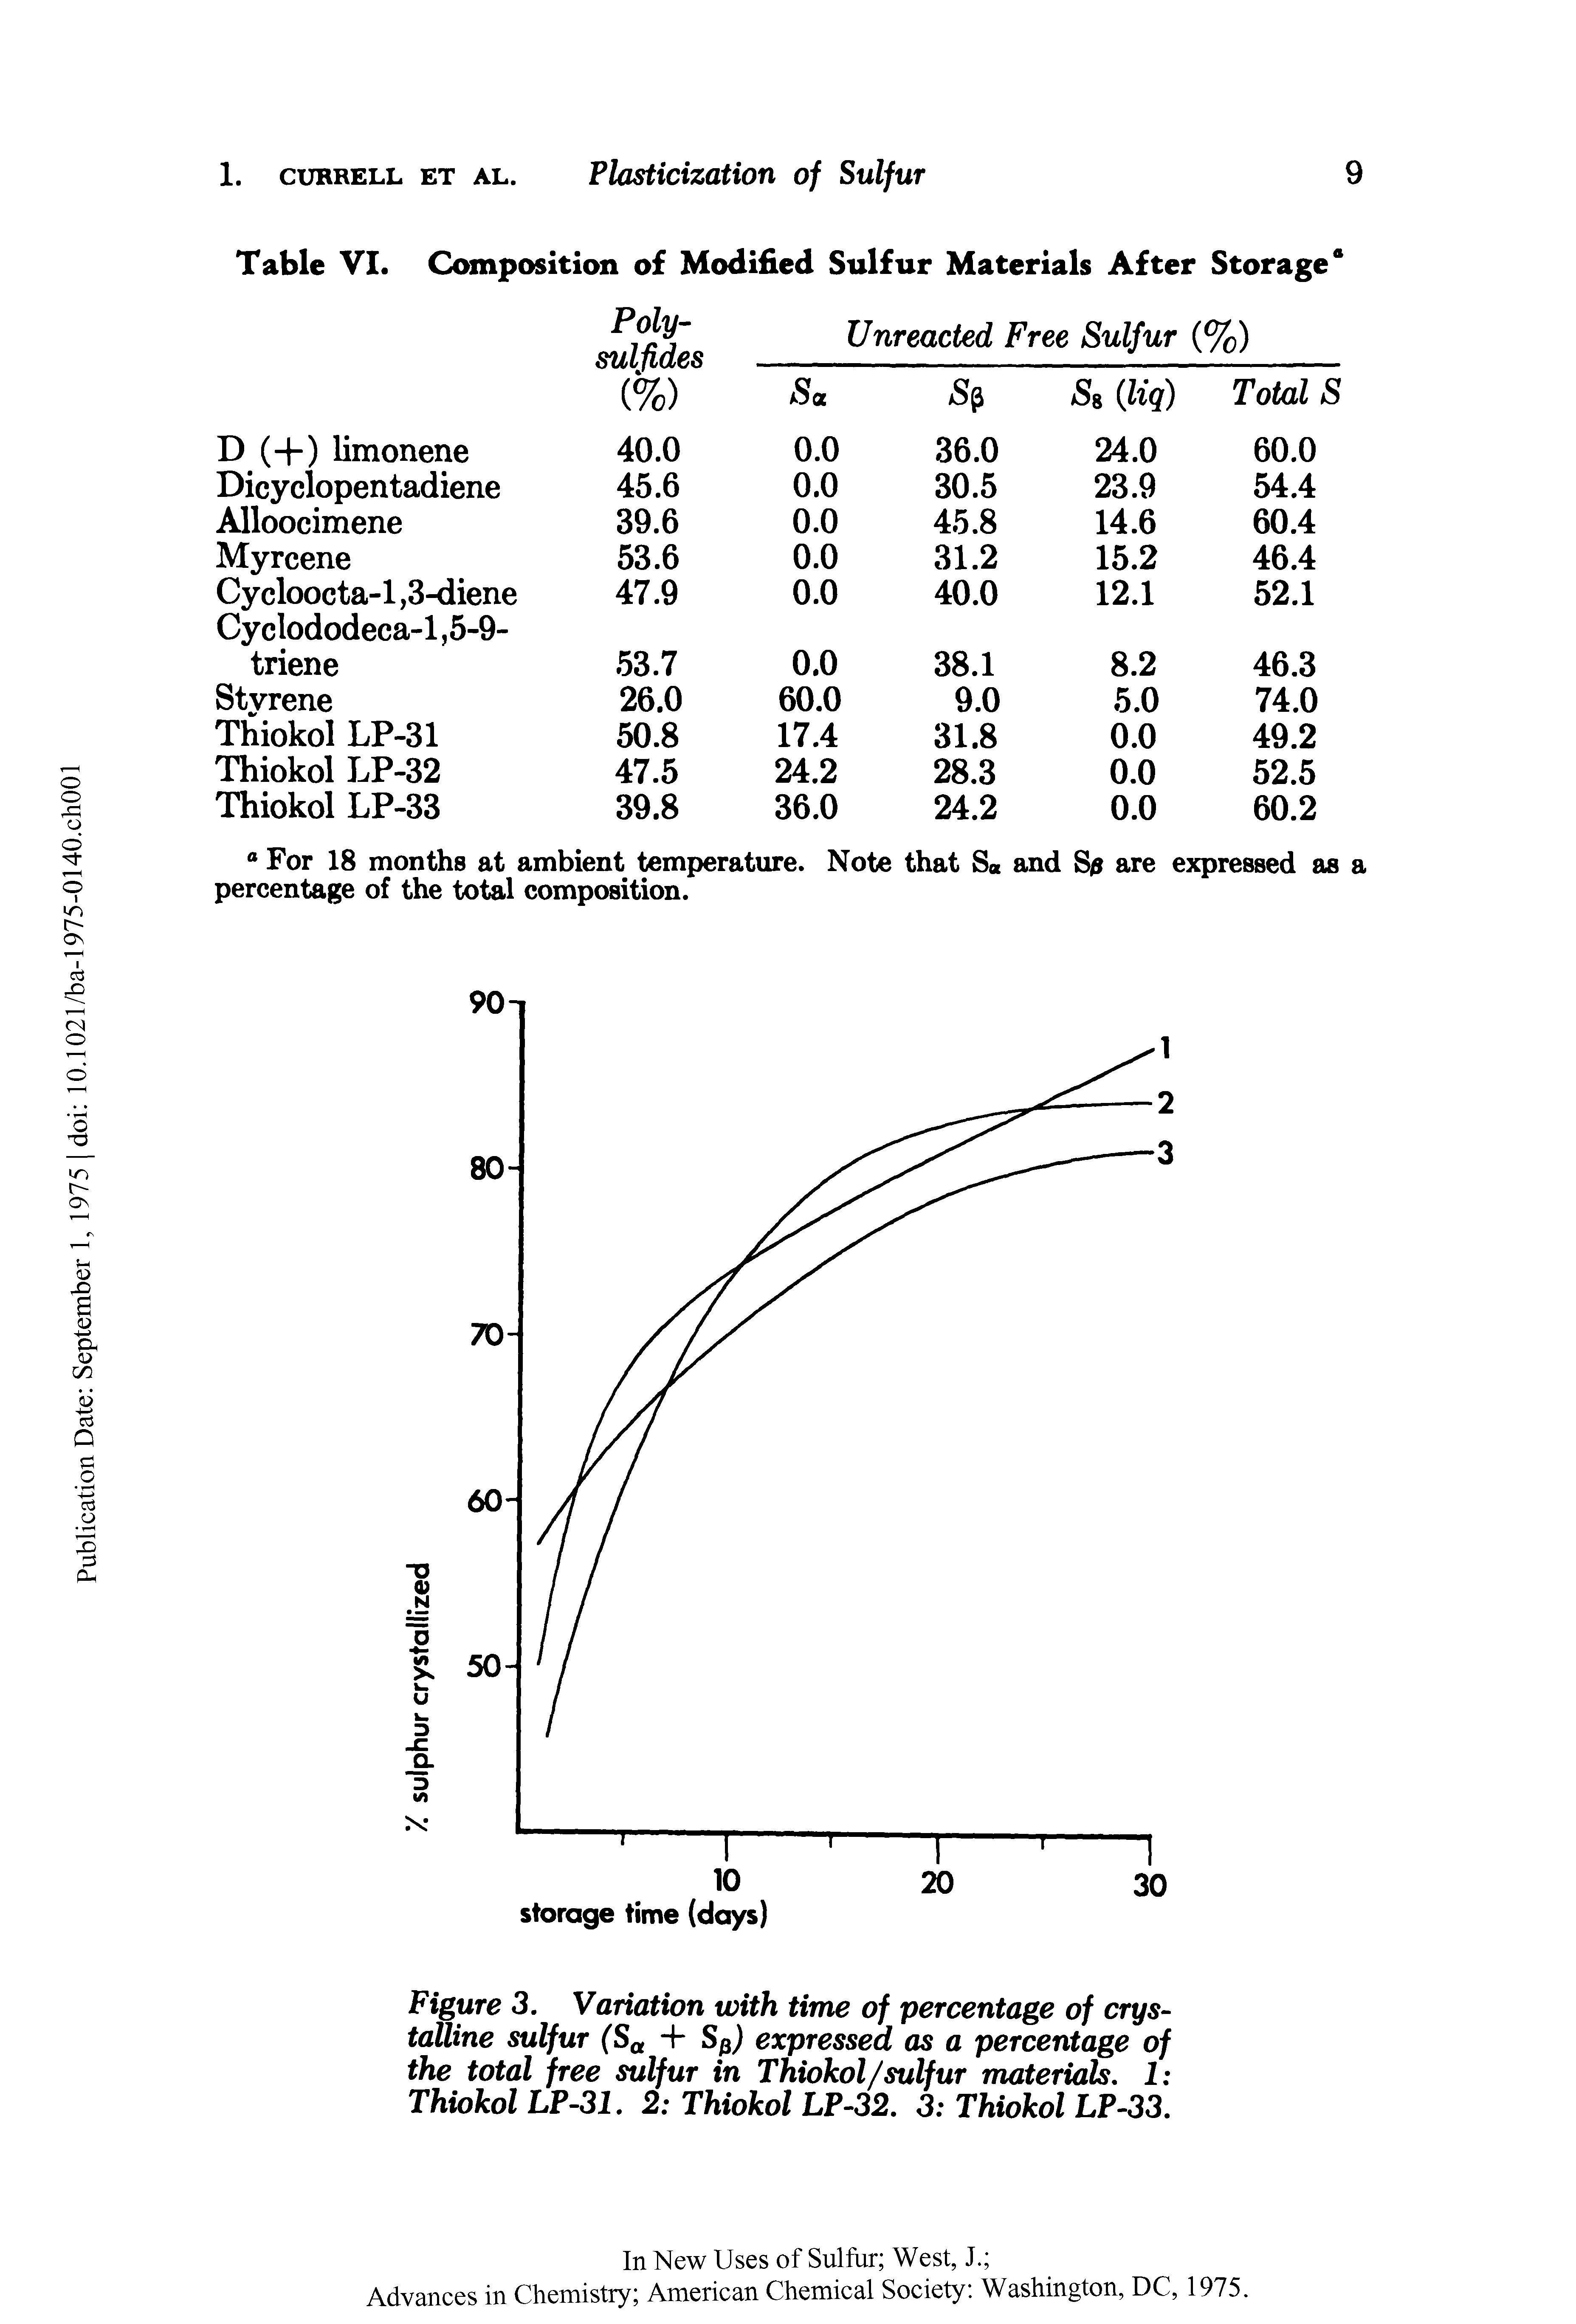 Figure 3. Variation with time of percentage of crystalline sulfur (Sa + Sp) expressed as a percentage of the total free sulfur in Thiokol/sulfur materials. 1 Thiokol LP-31. 2 Thiokol LP-32. 3 Thiokol LP-33.